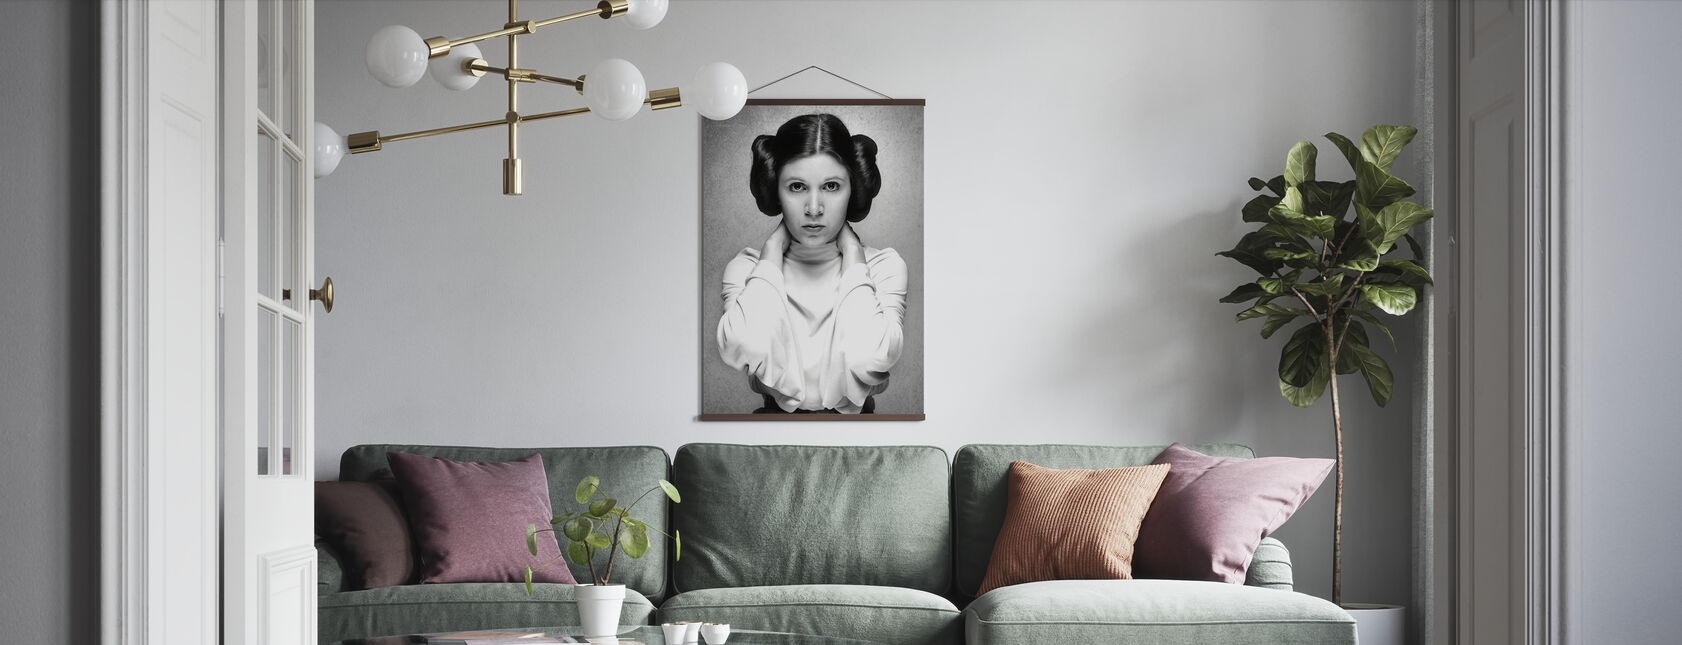 Prinses Leia - Carrie Fisher - Poster - Woonkamer